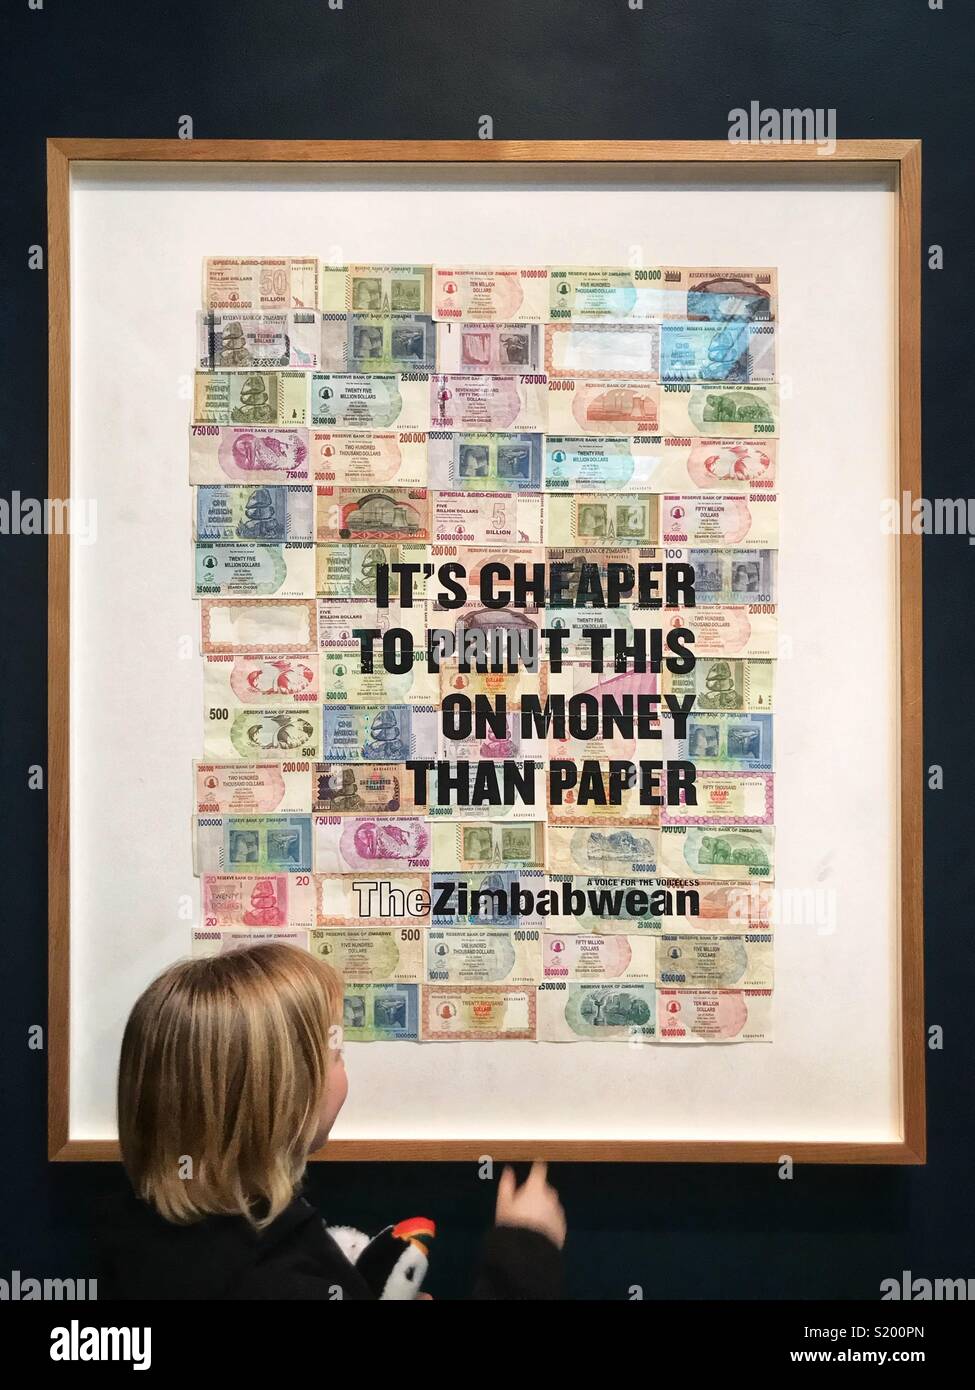 Worthless currency: the Zimbabwean dollar. A display at the British Museum in London, England. Stock Photo